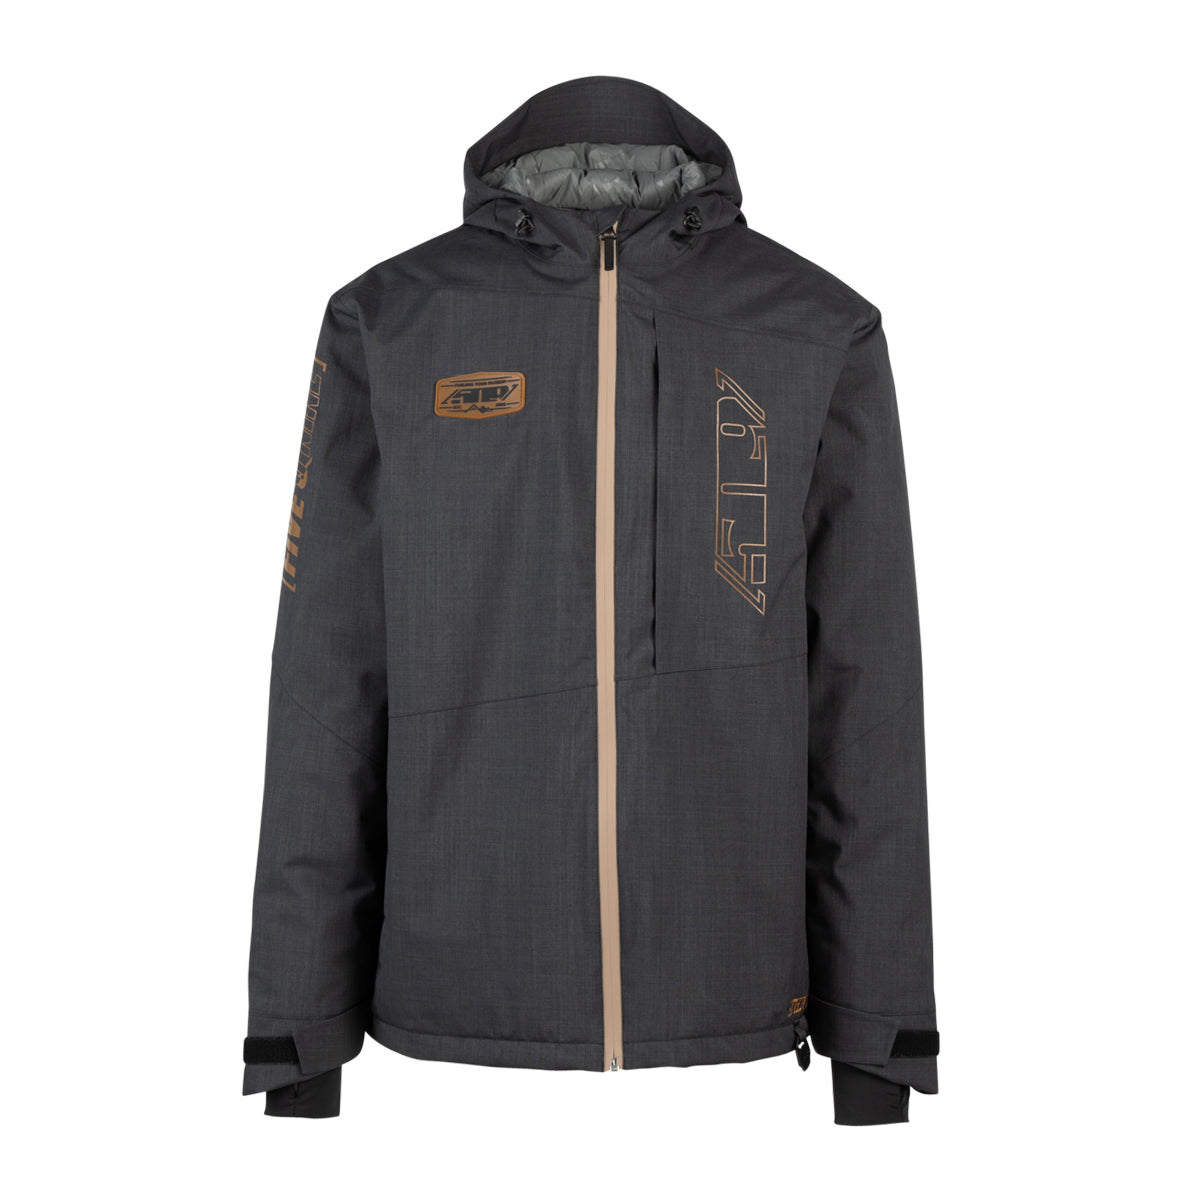 509 BLACK FRIDAY LIMITED EDITION BLACK GUM FORGE INSULATED JACKET